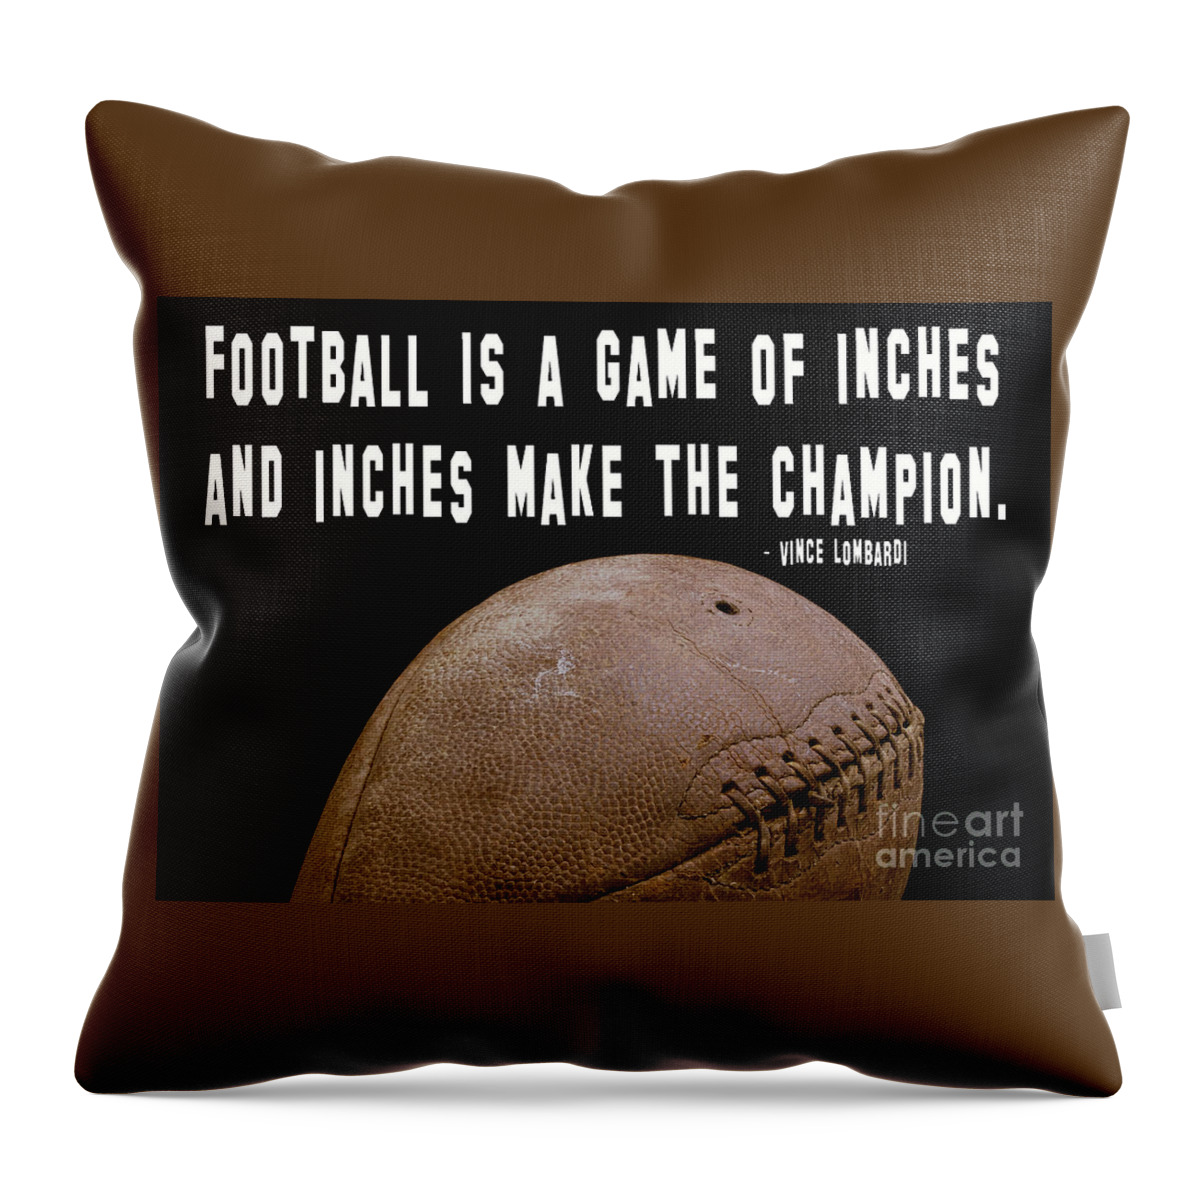 Football Throw Pillow featuring the photograph Inches Football Vince Lombardi by Edward Fielding